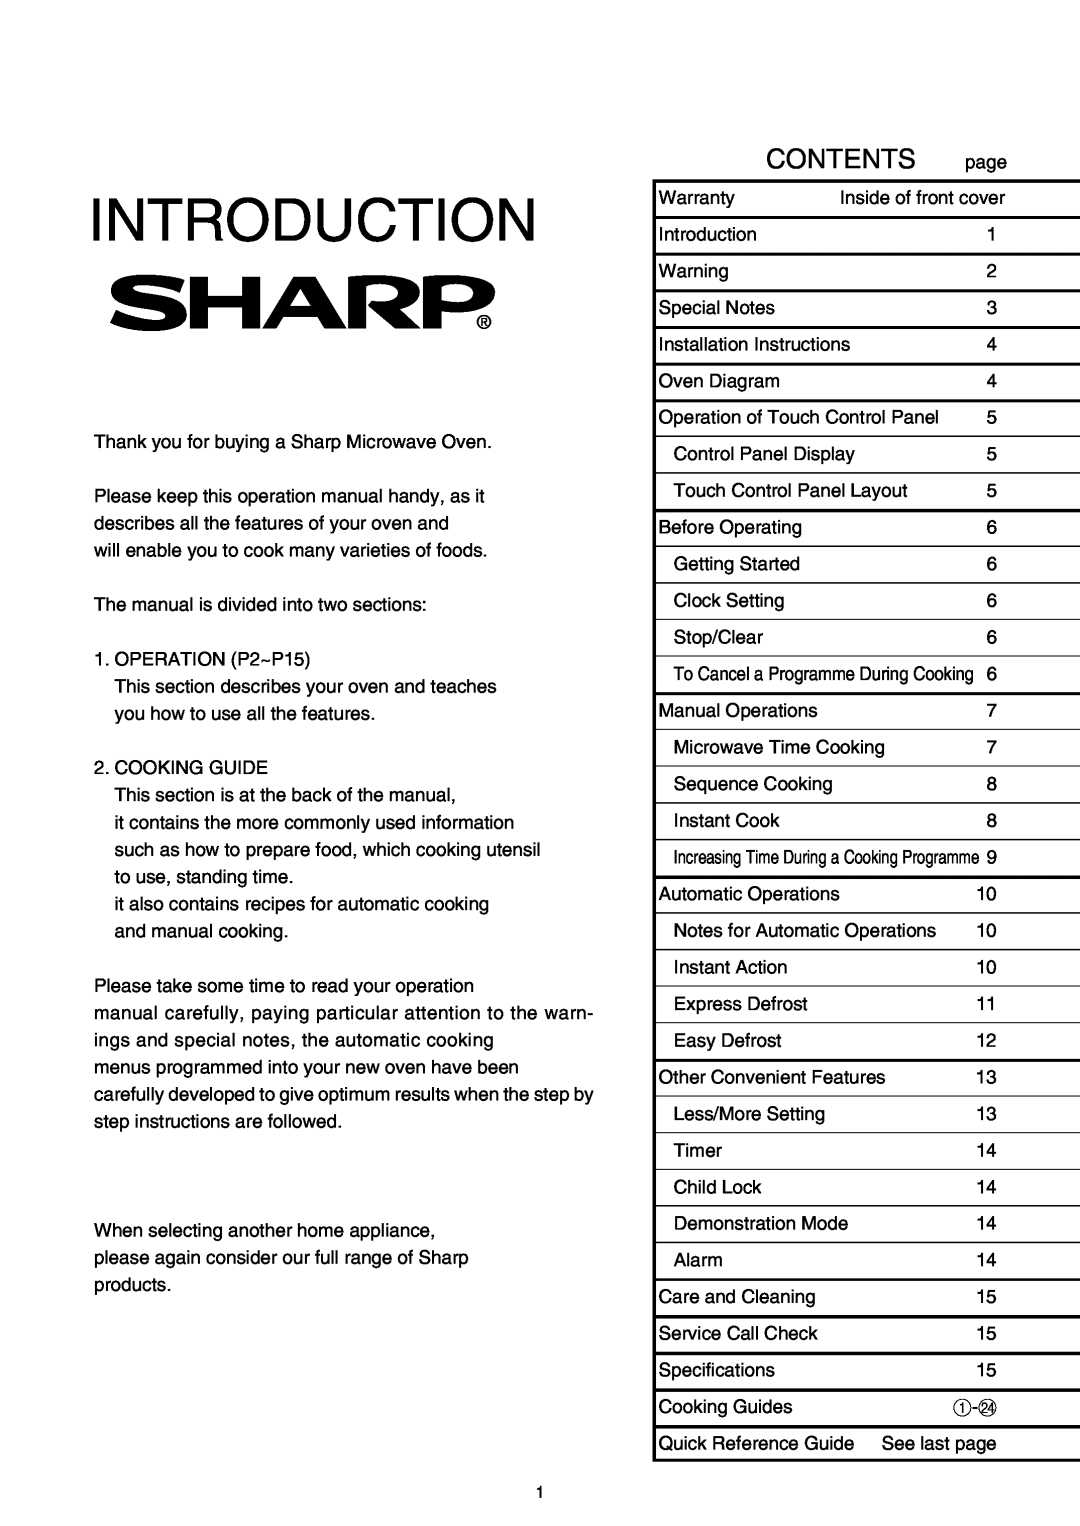 Sharp R-330F J, R-395F(S) operation manual Introduction, Contents 